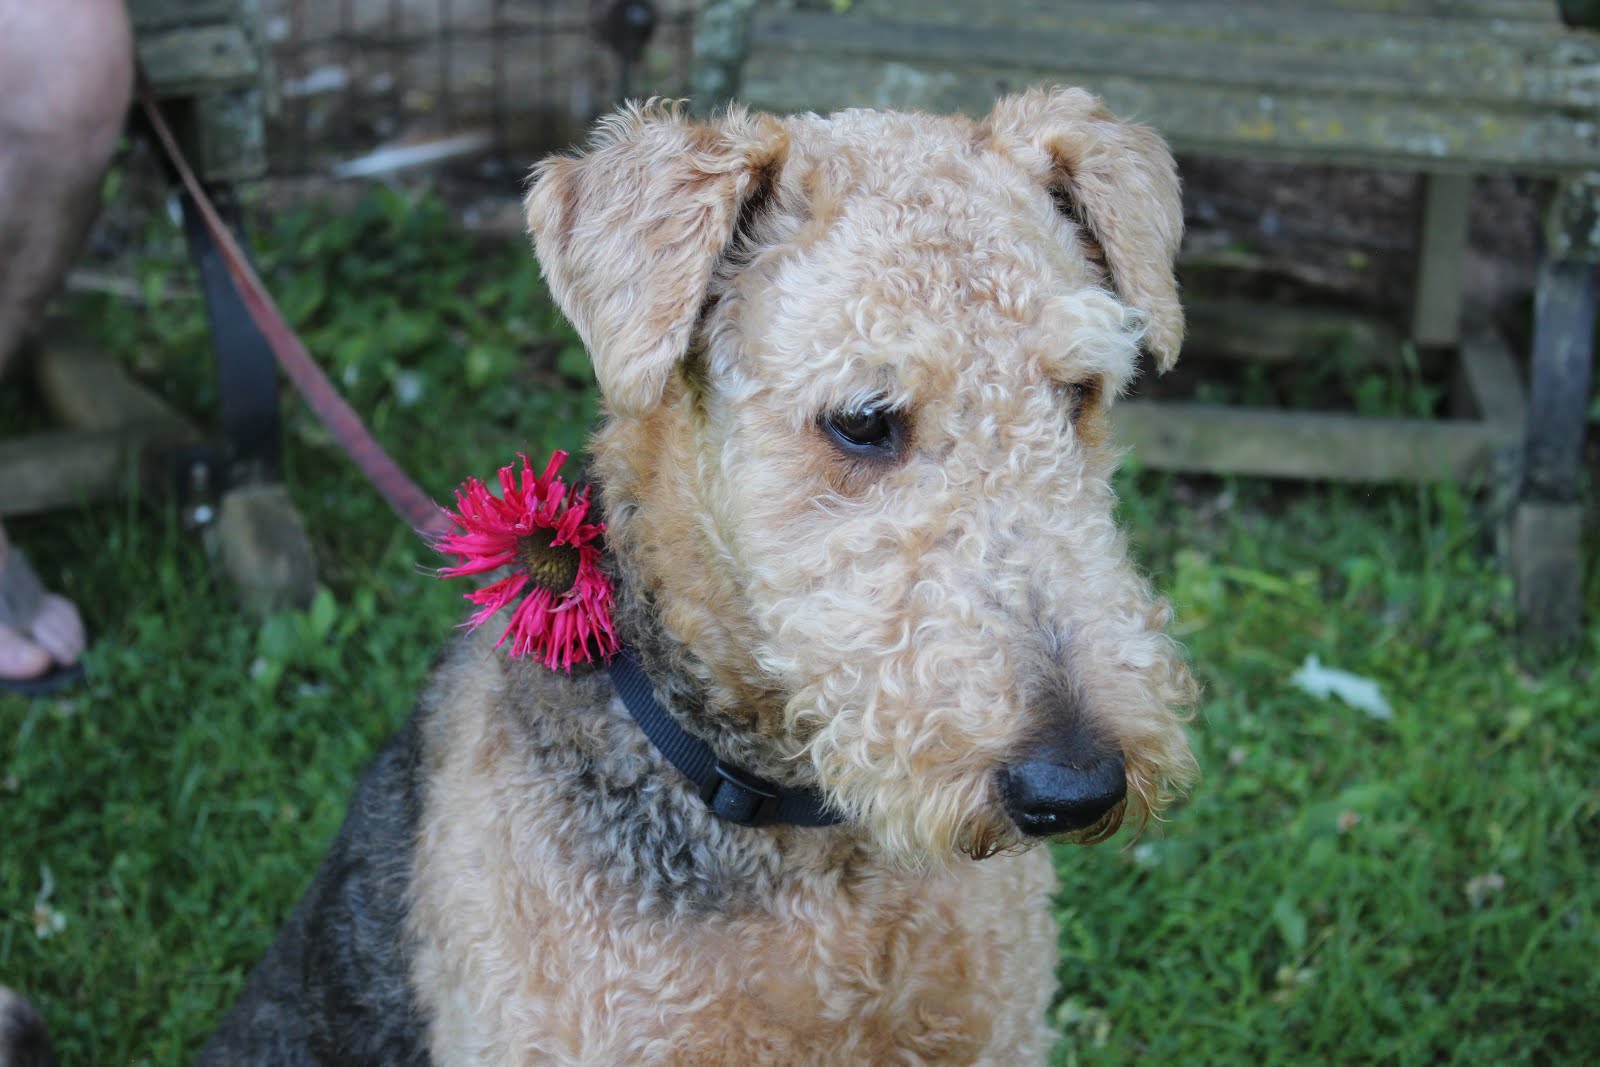 Luke our Airedale